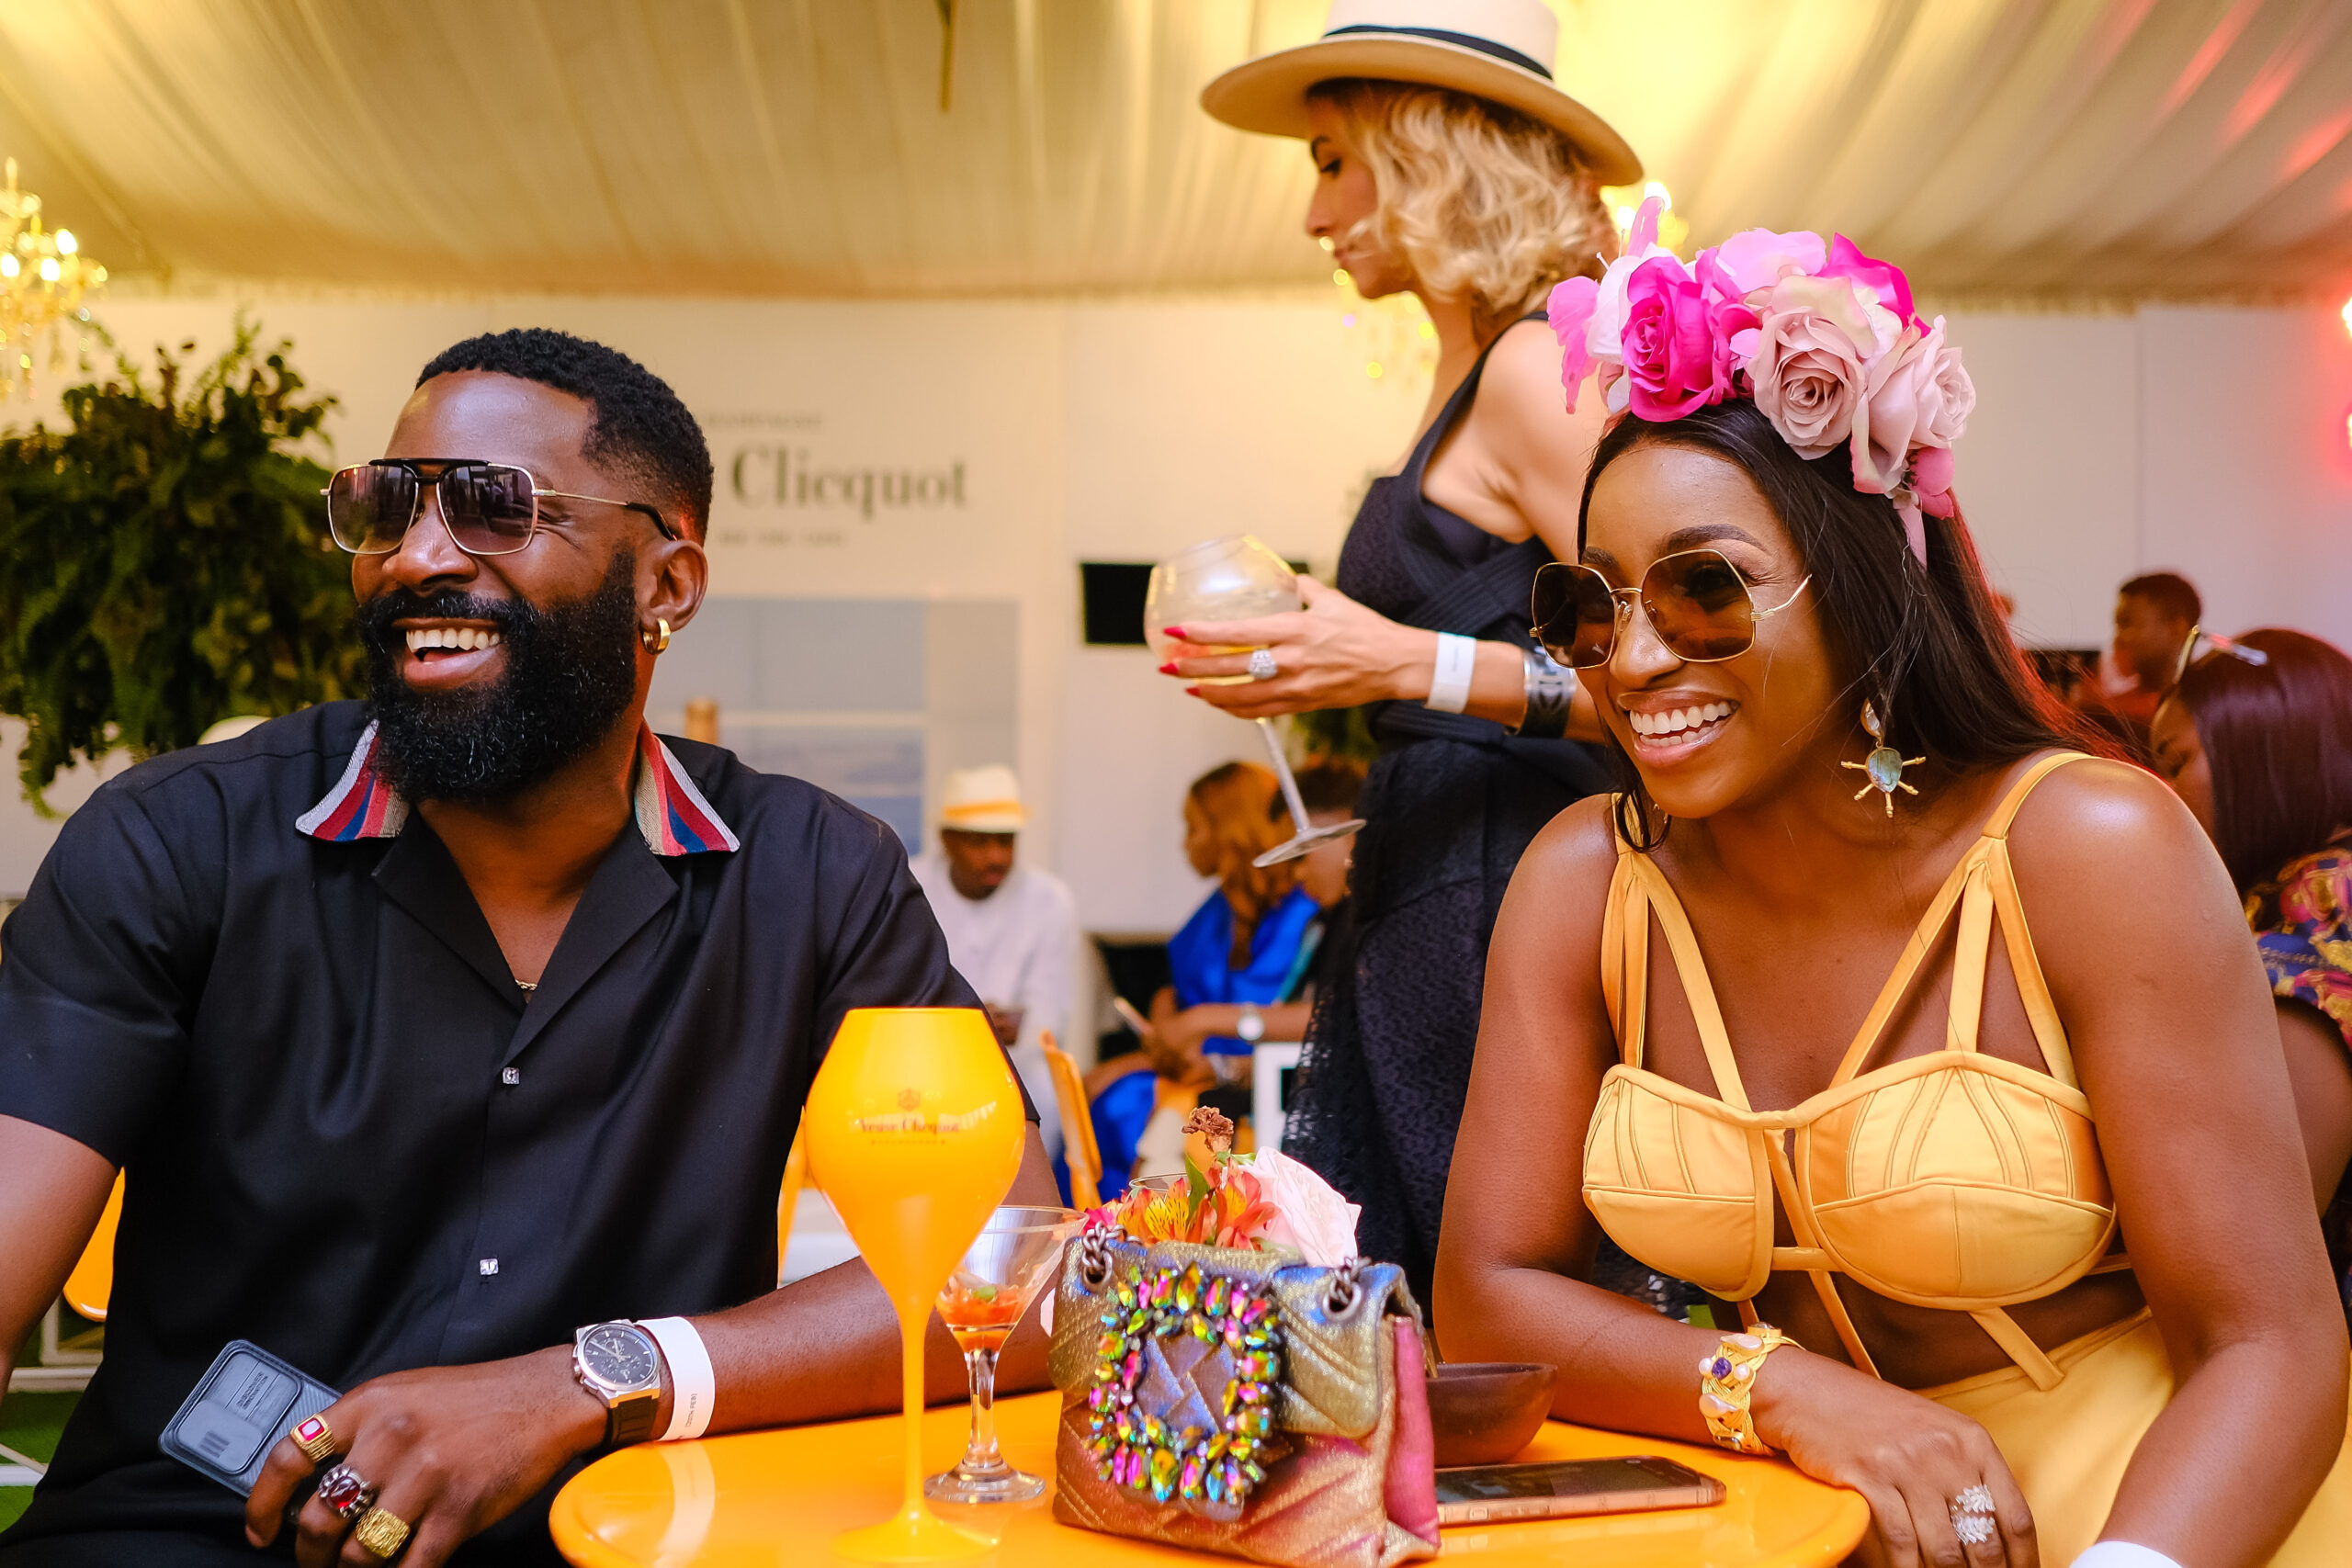 Fashionable Looks Abounded at the 2023 Veuve Clicquot Polo Classic - EBONY